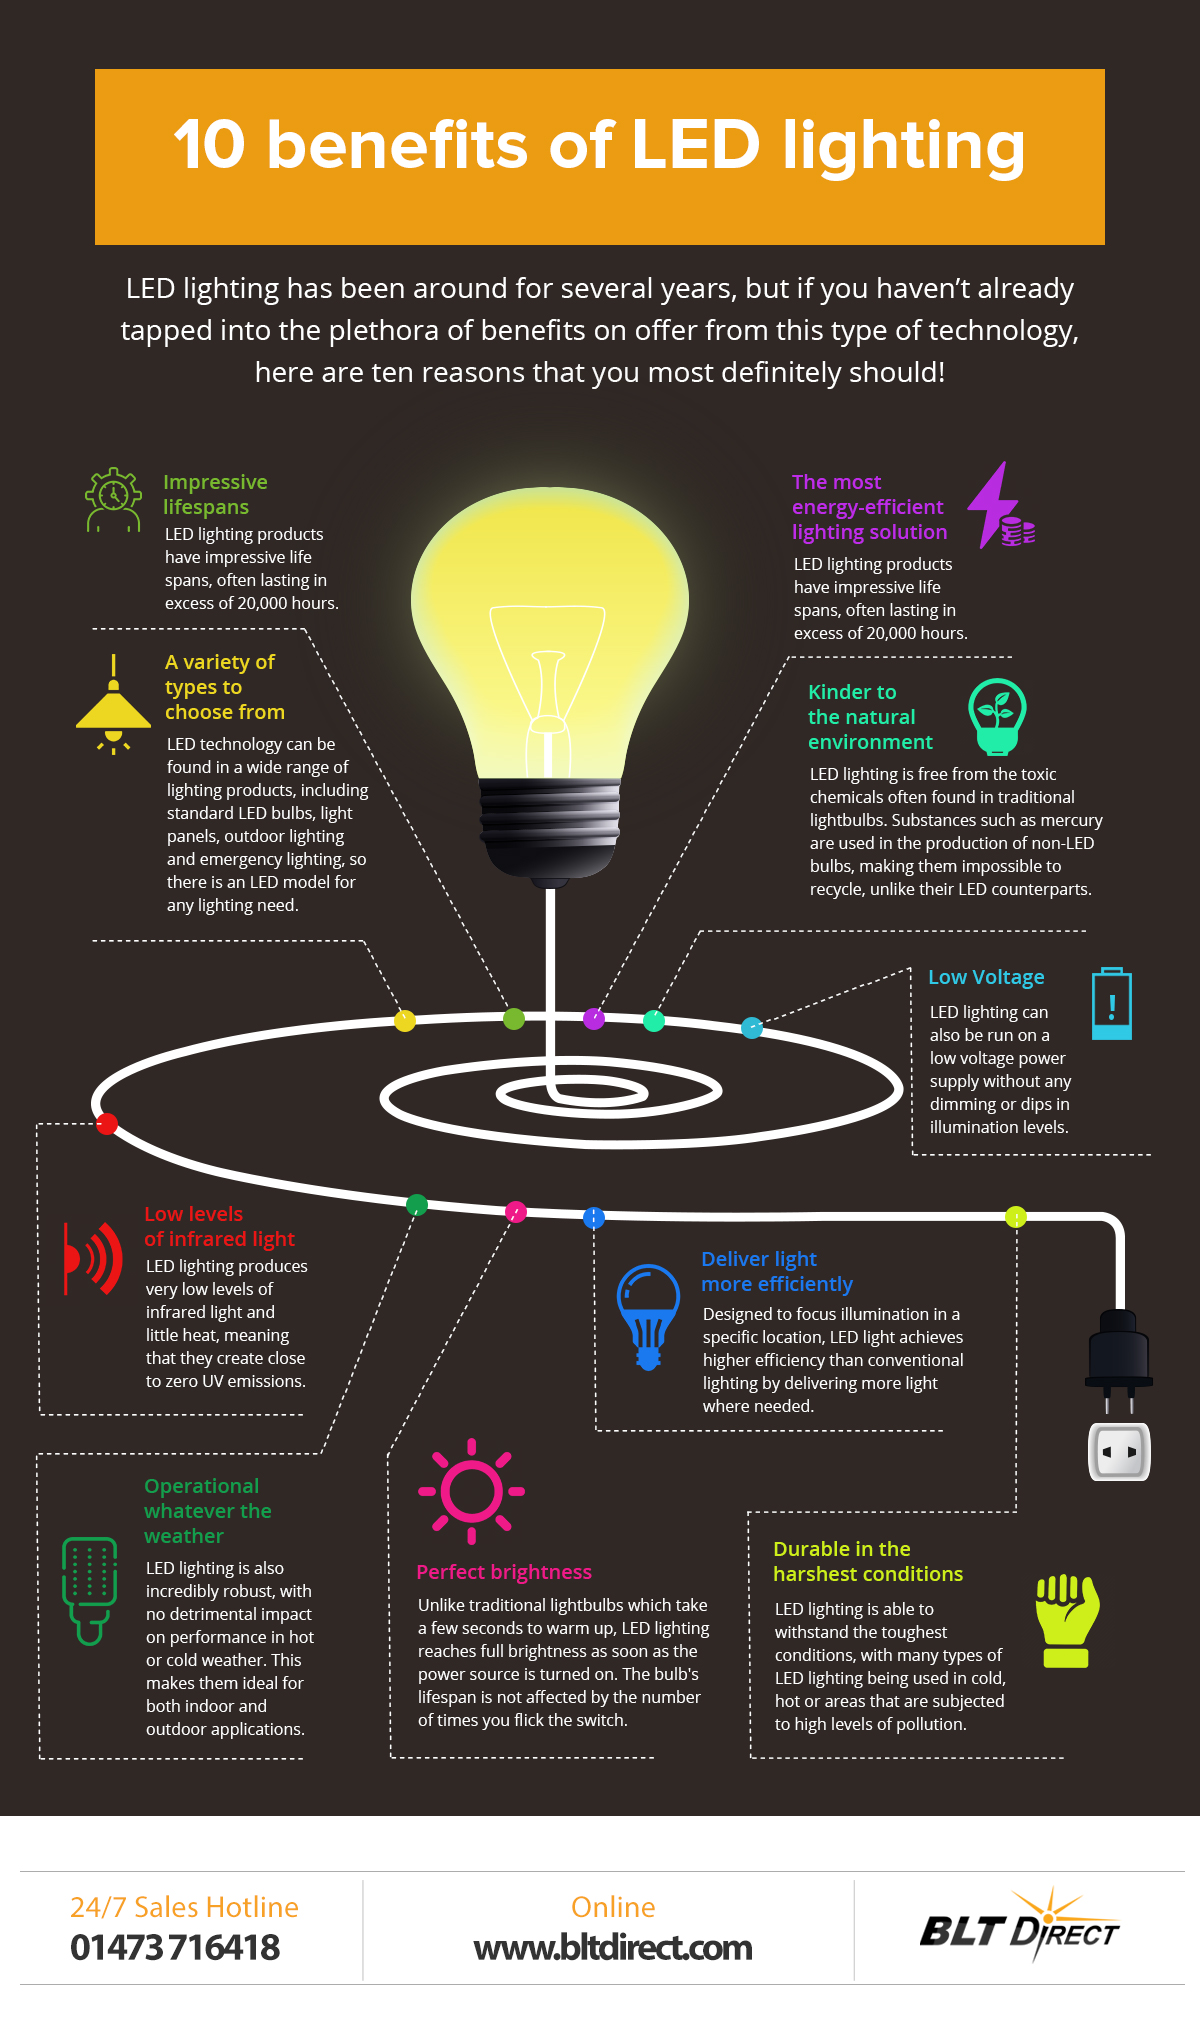 10_benefits_of_LED_lighting_infographic_ver01-1